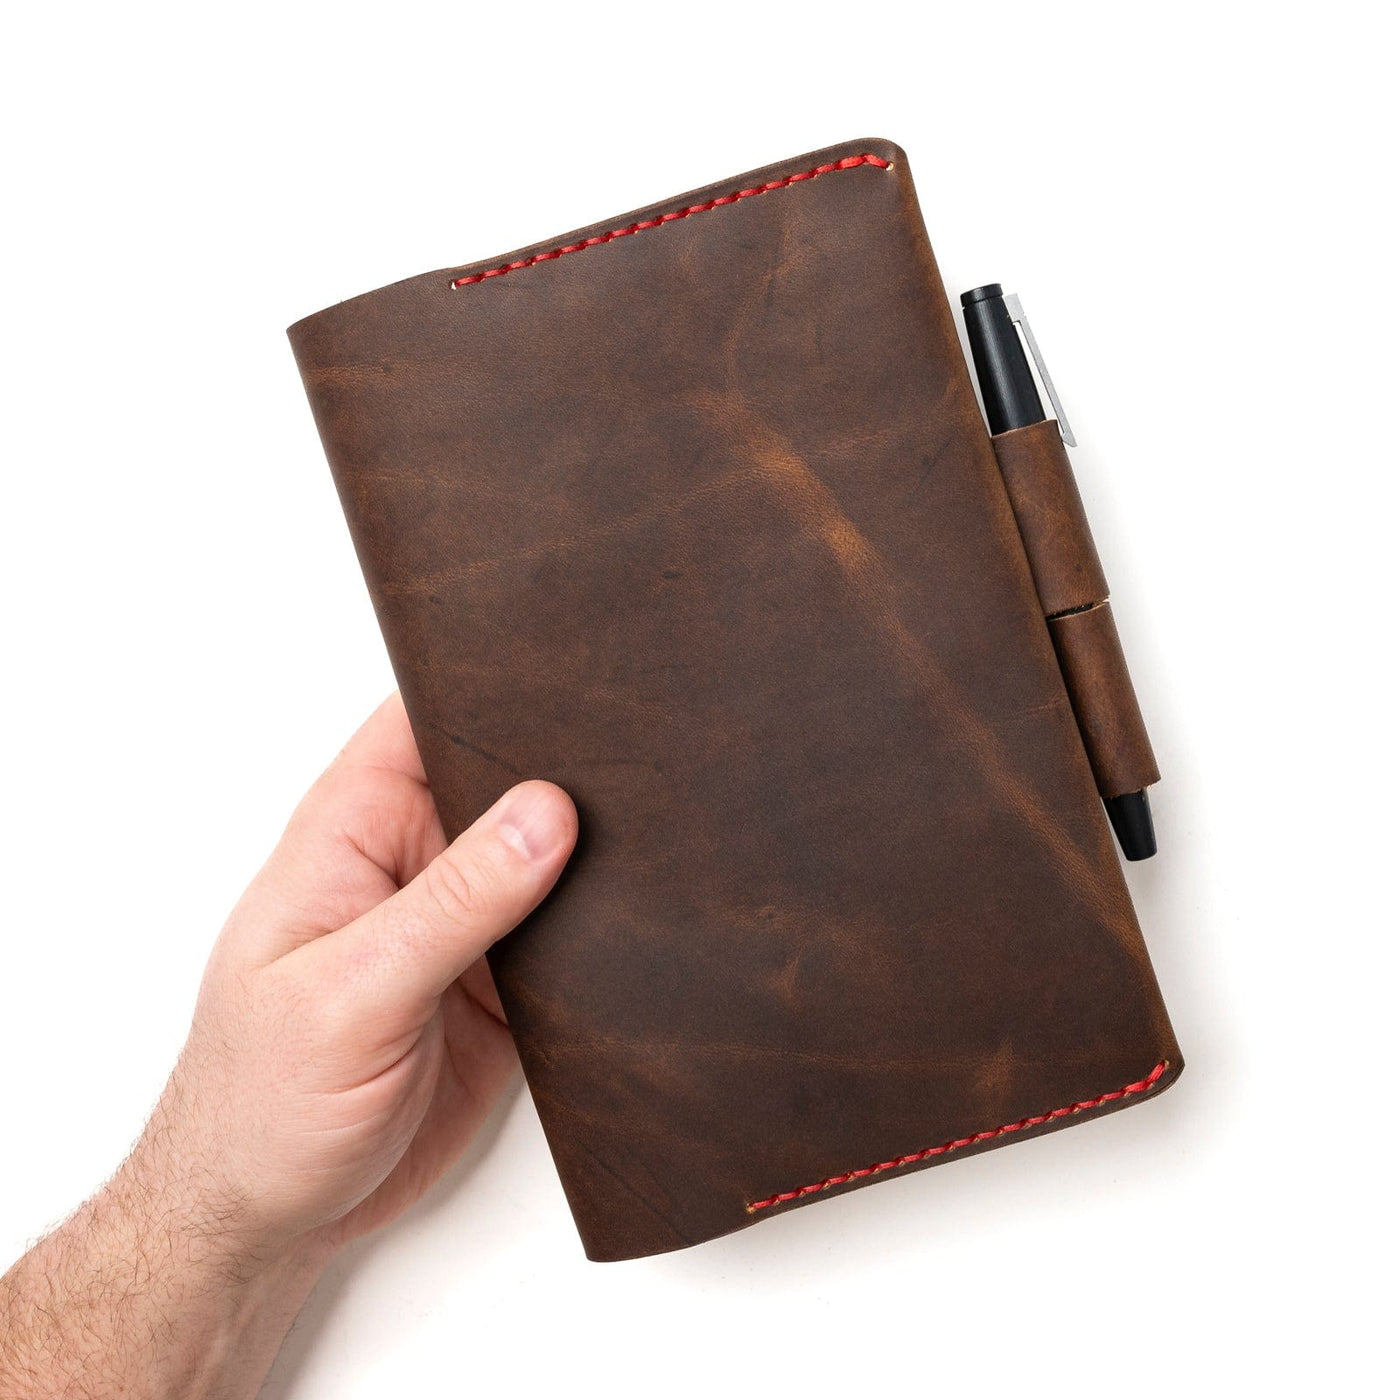 Leather Moleskine Large Notebook Cover - Heritage Brown Popov Leather